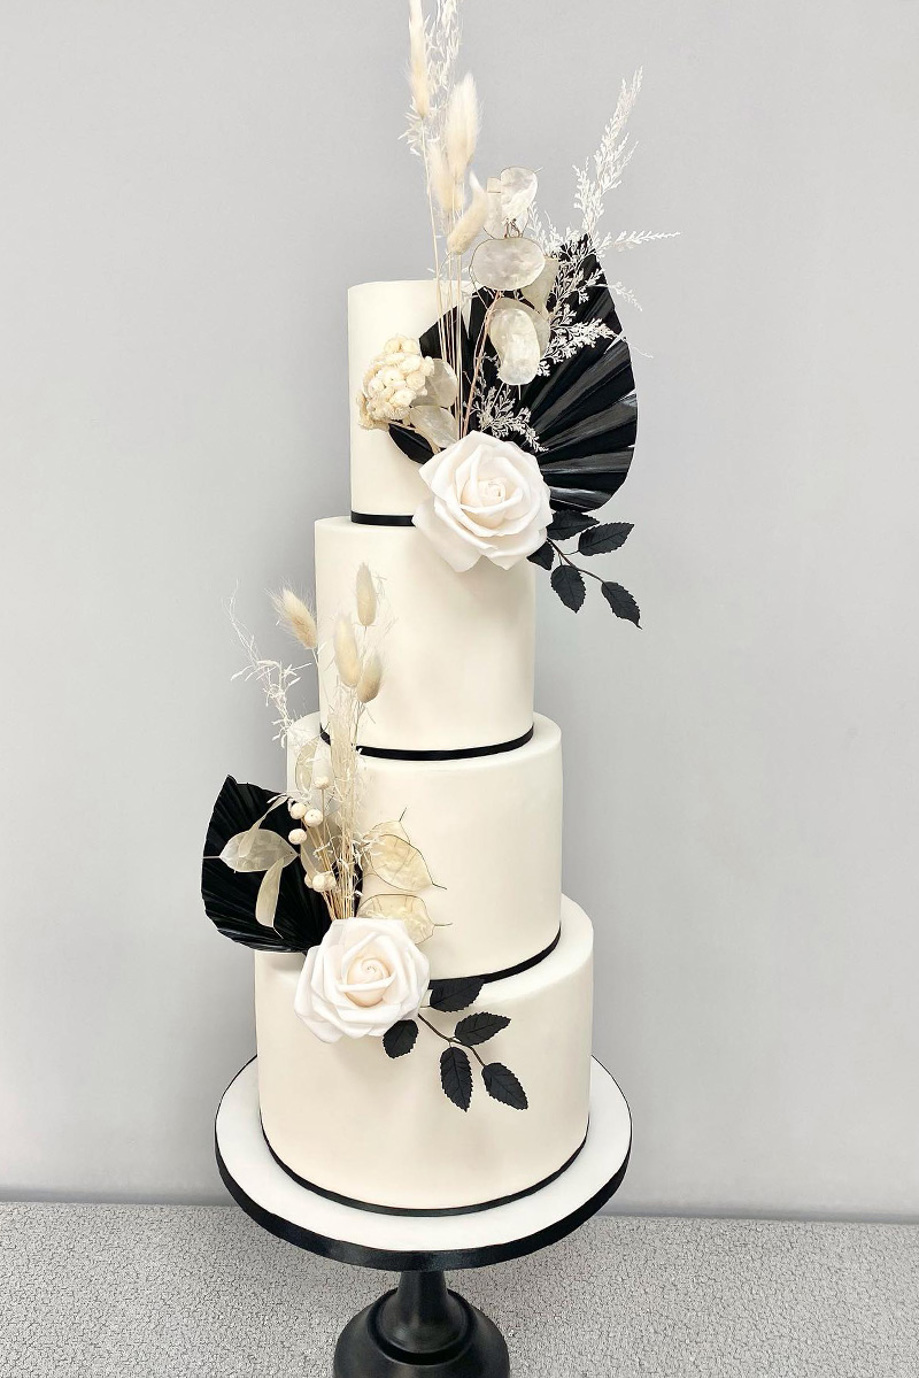 Monochrome four-tier cake with large black leaves, white roses and pampas grass